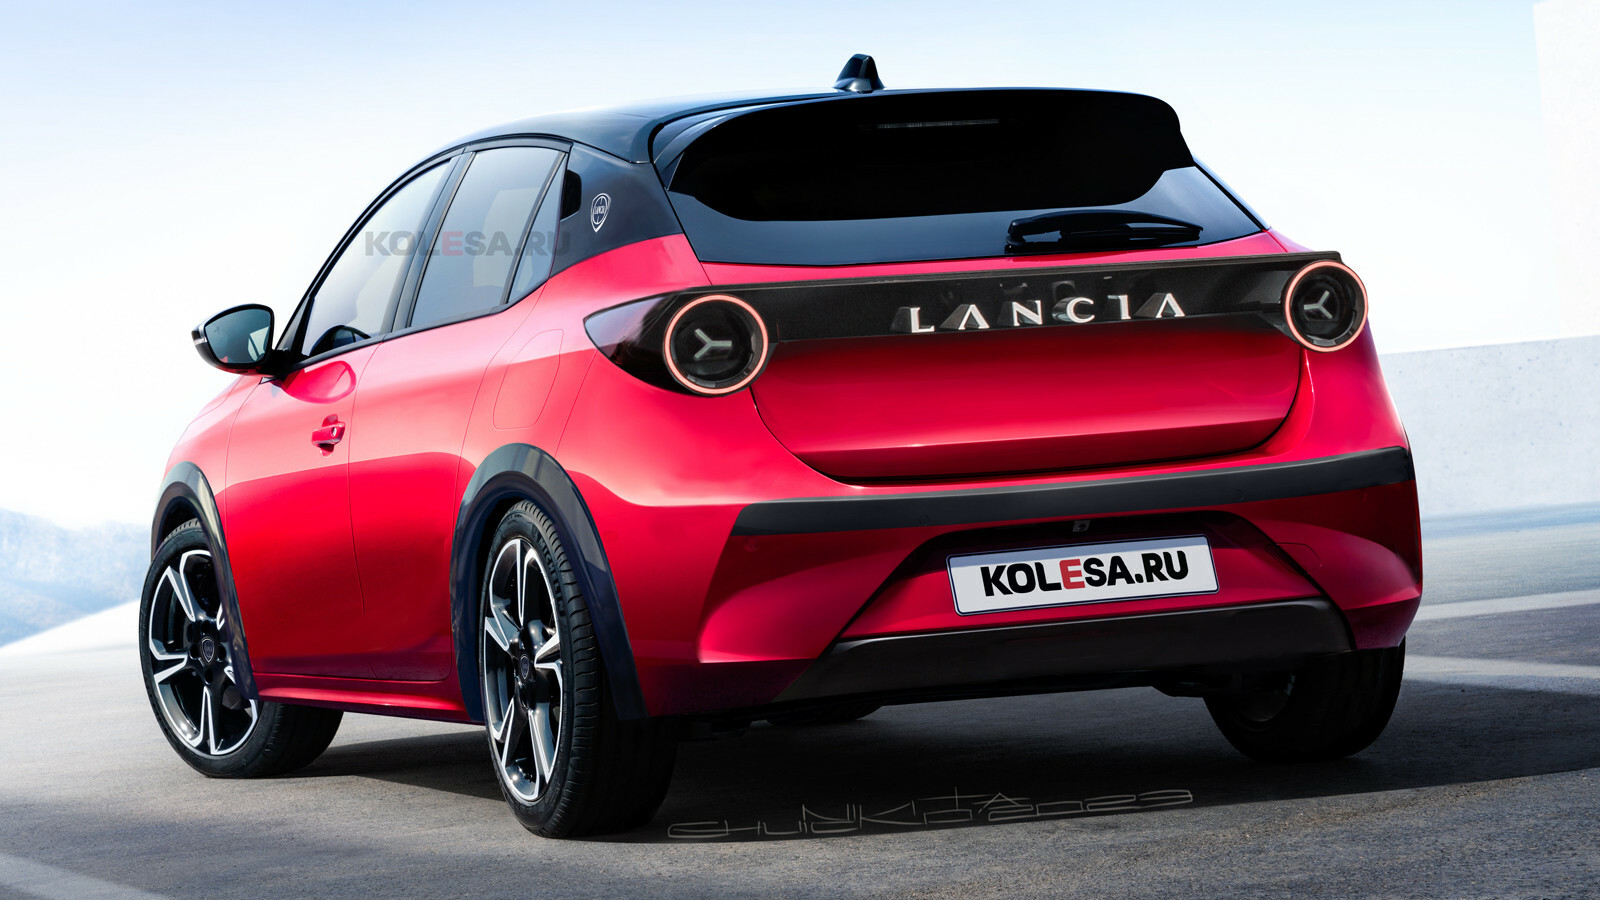 2025 Lancia Ypsilon Render Gives Us An Early Look At Electric Hatch